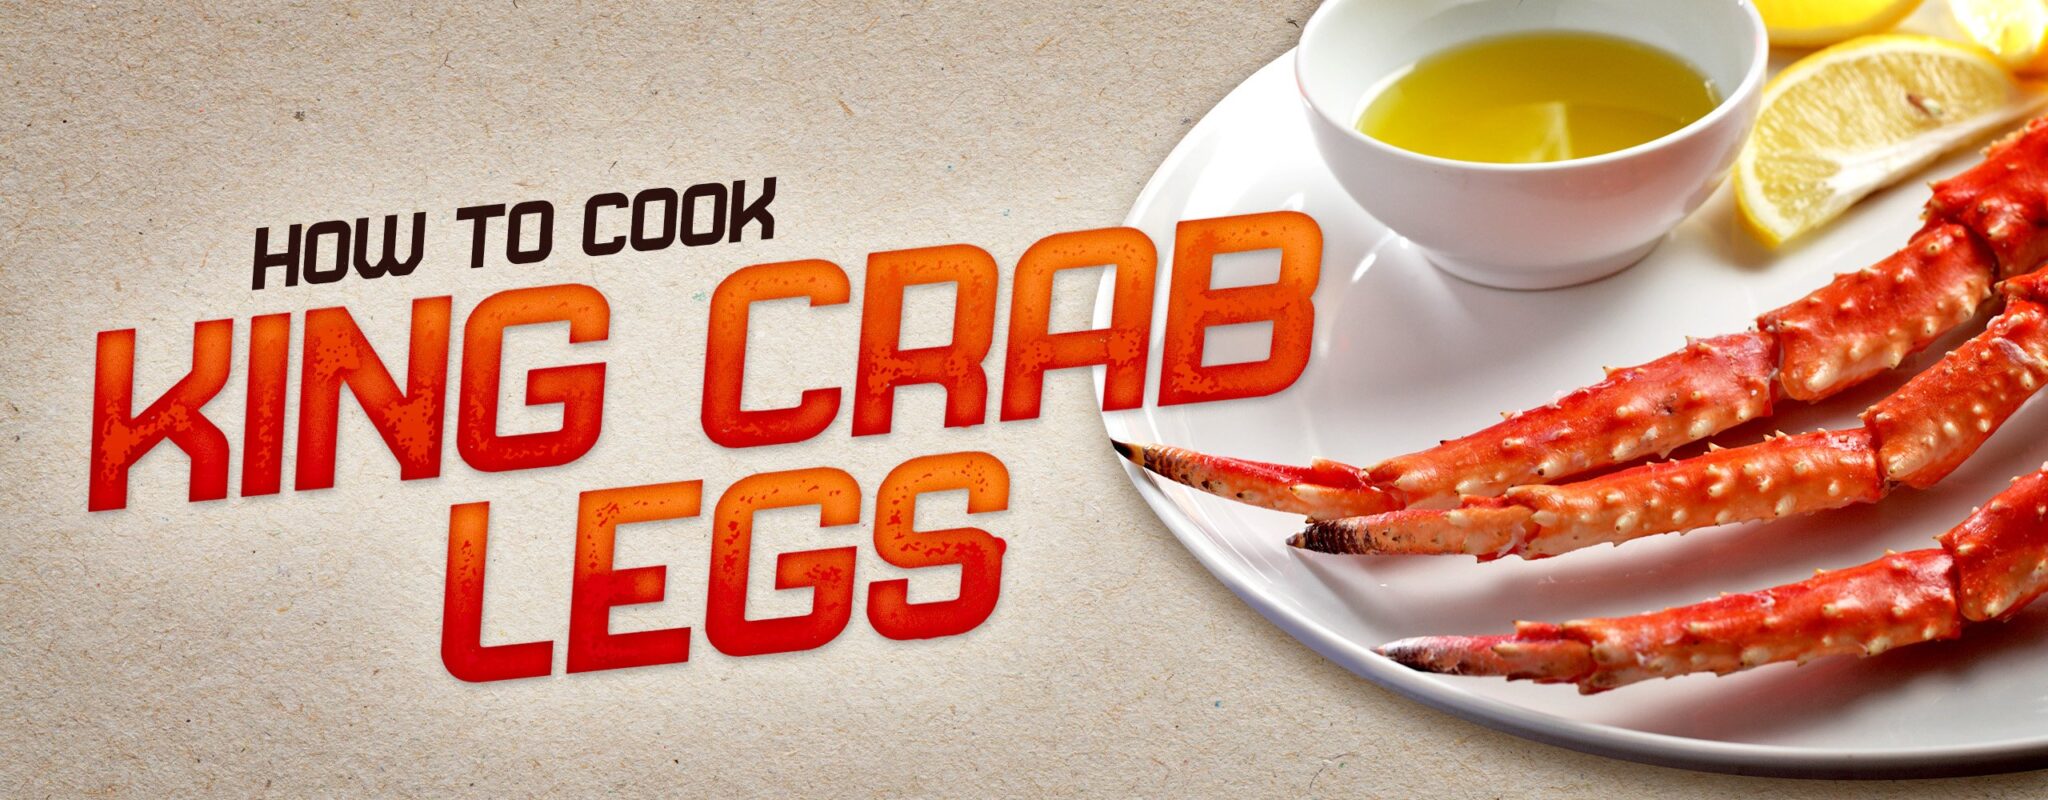 How to Cook Cooper’s King Crab Legs